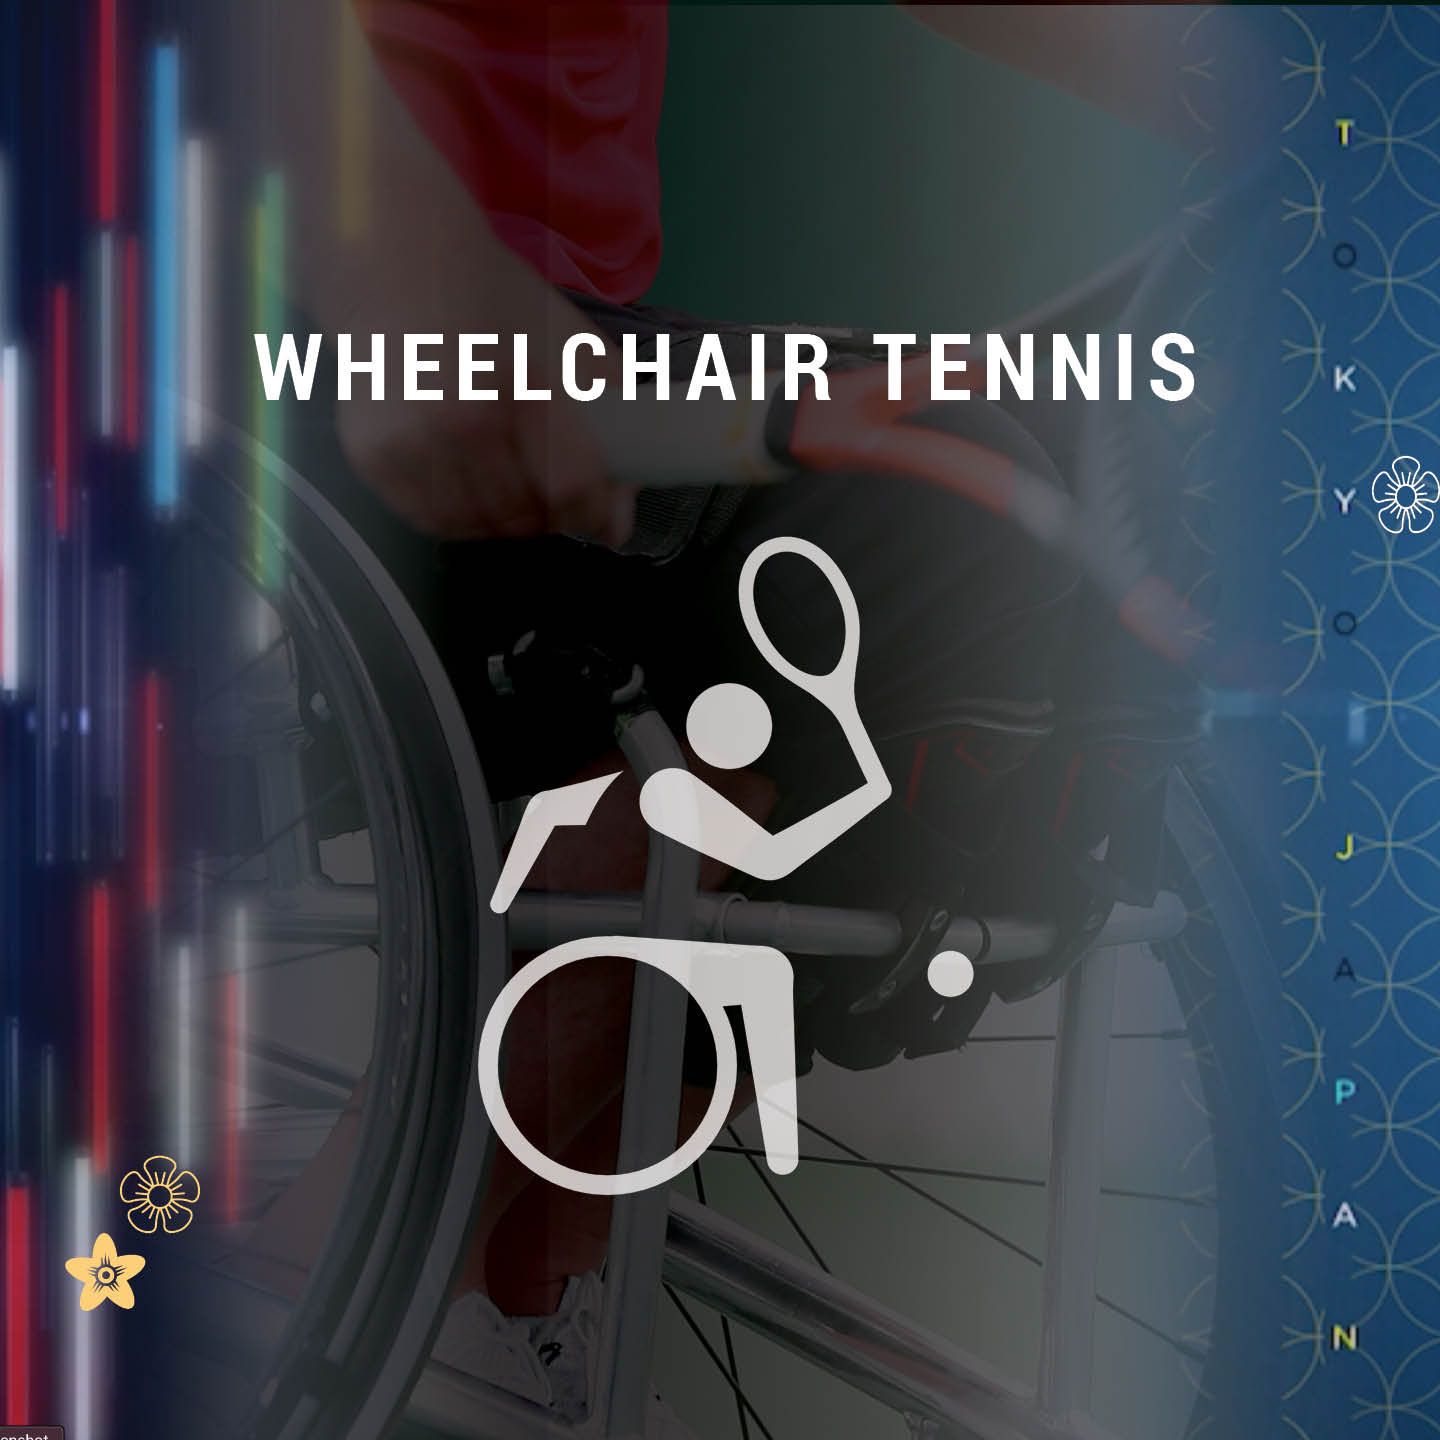 Wheelchair Tennis Live Stream and Video on Demand